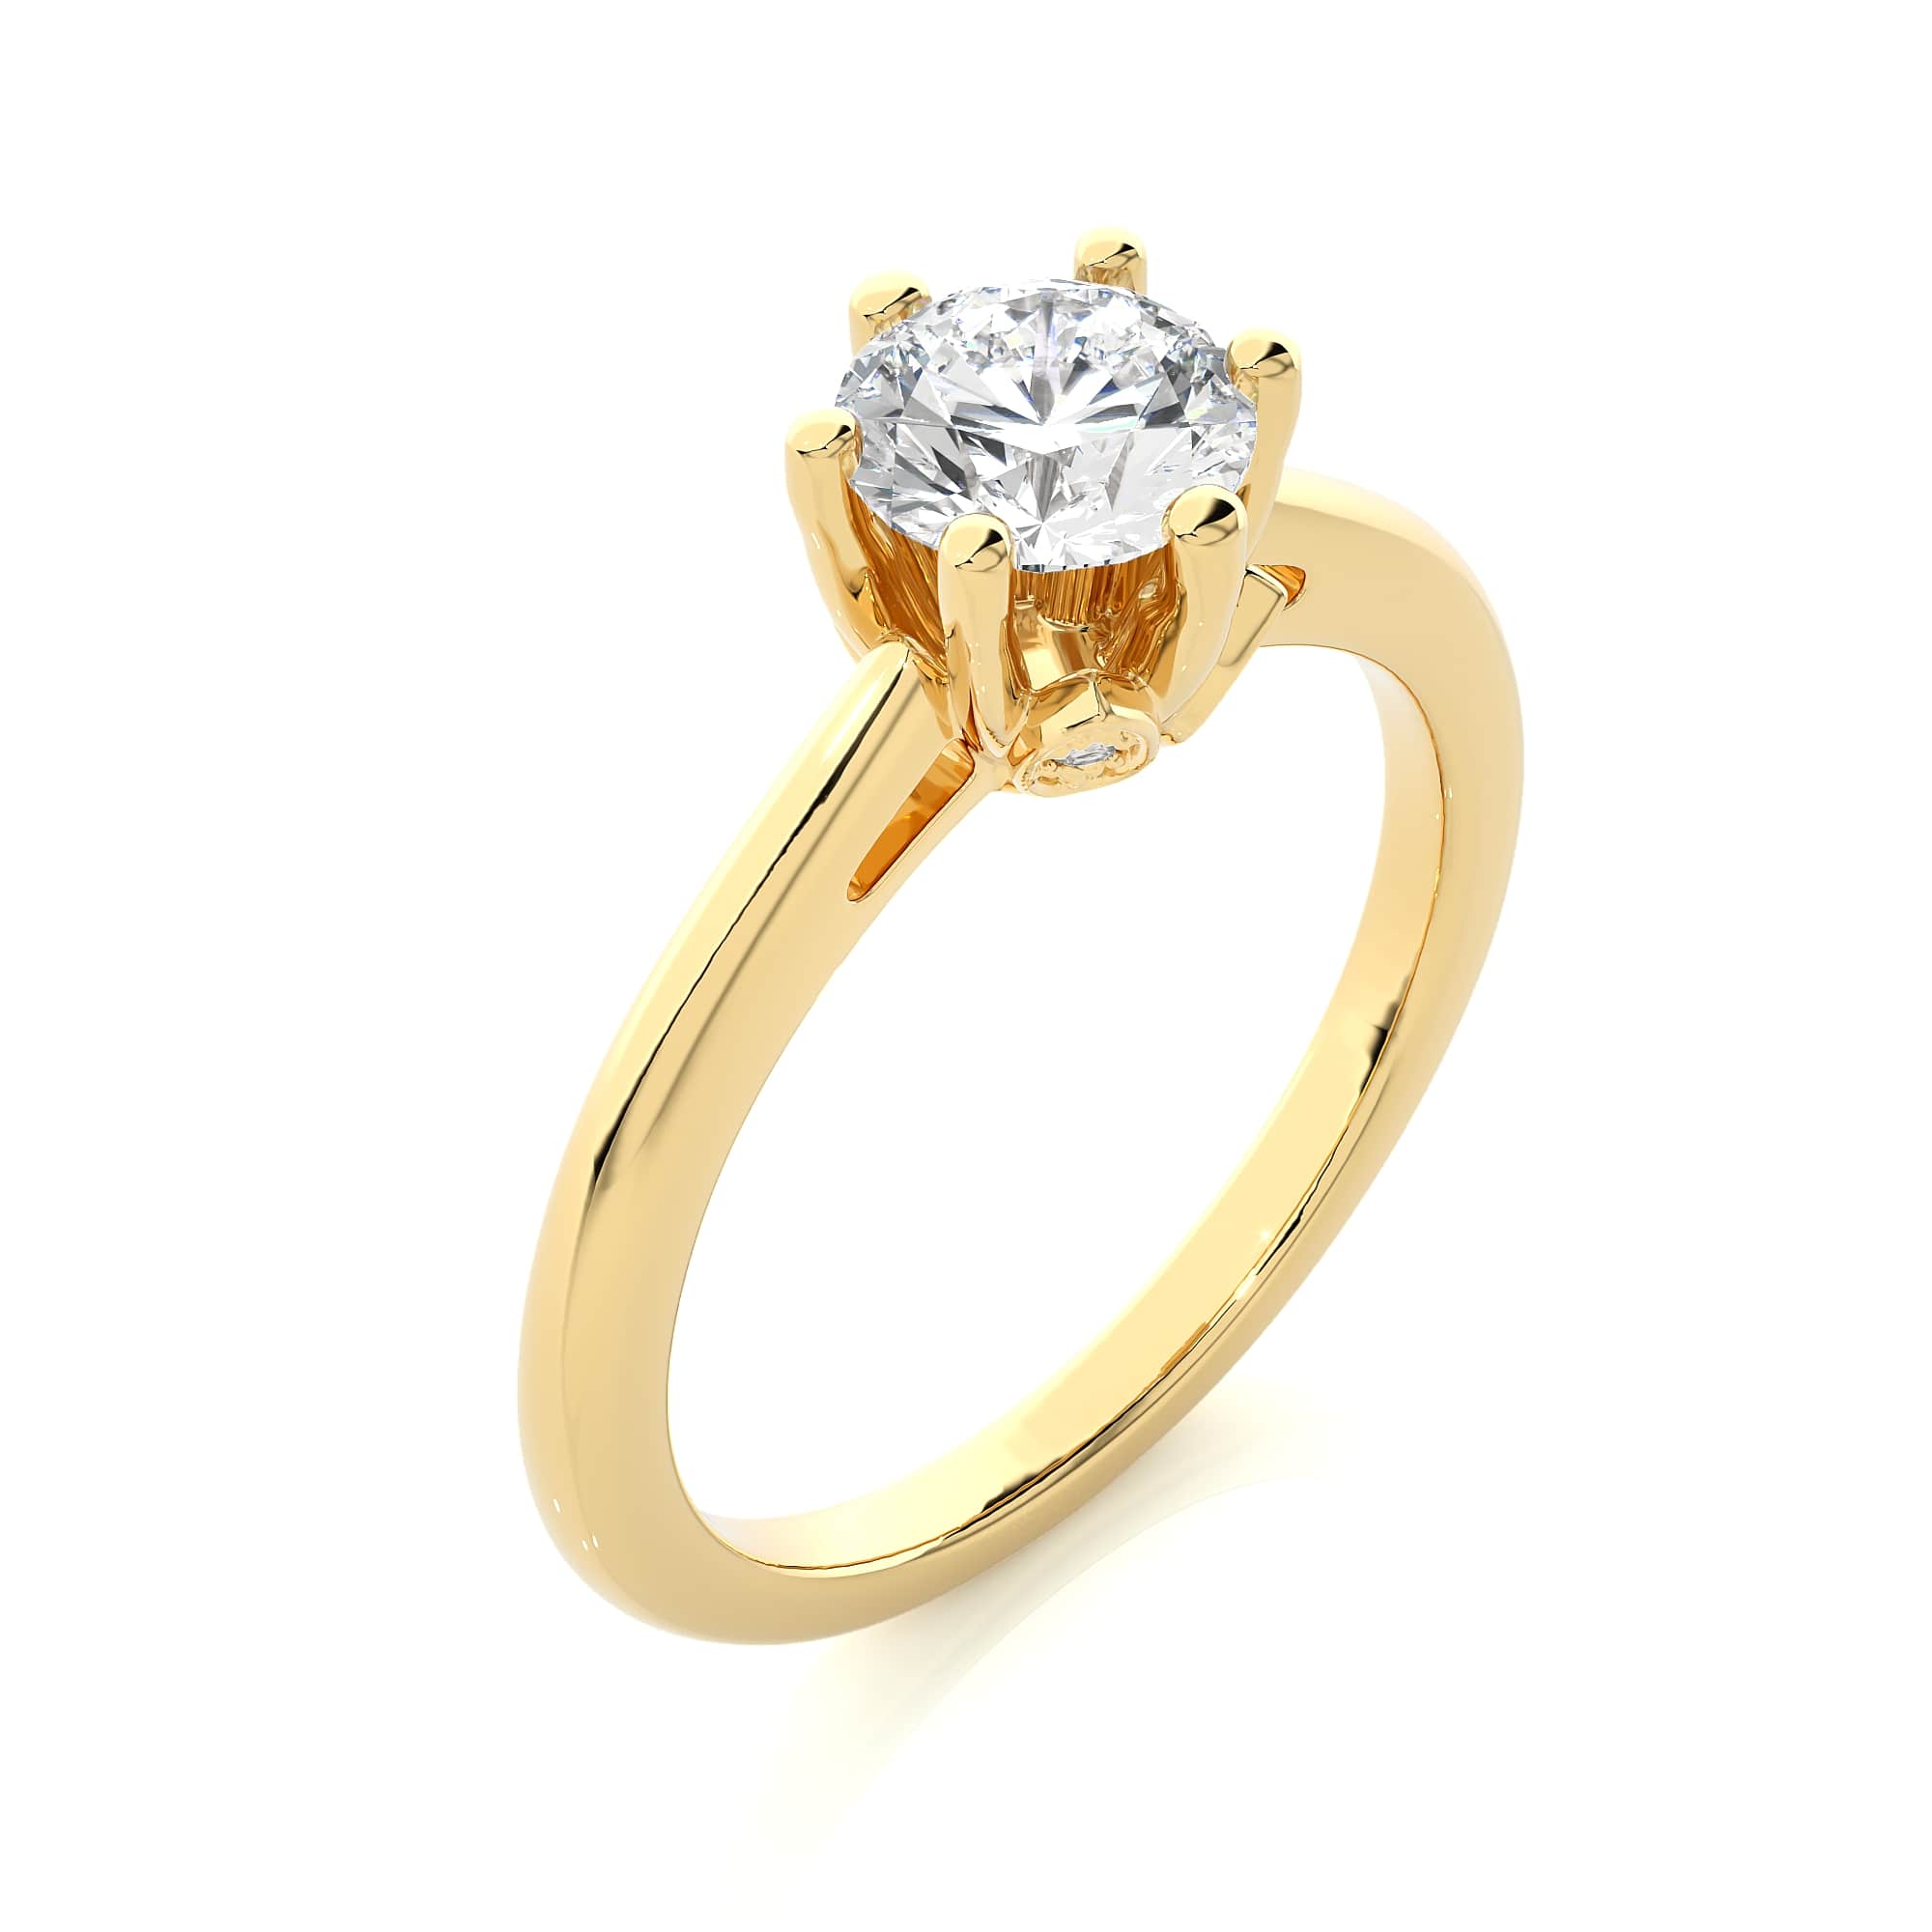 Solitaire Diamond Ring in Yellow Gold